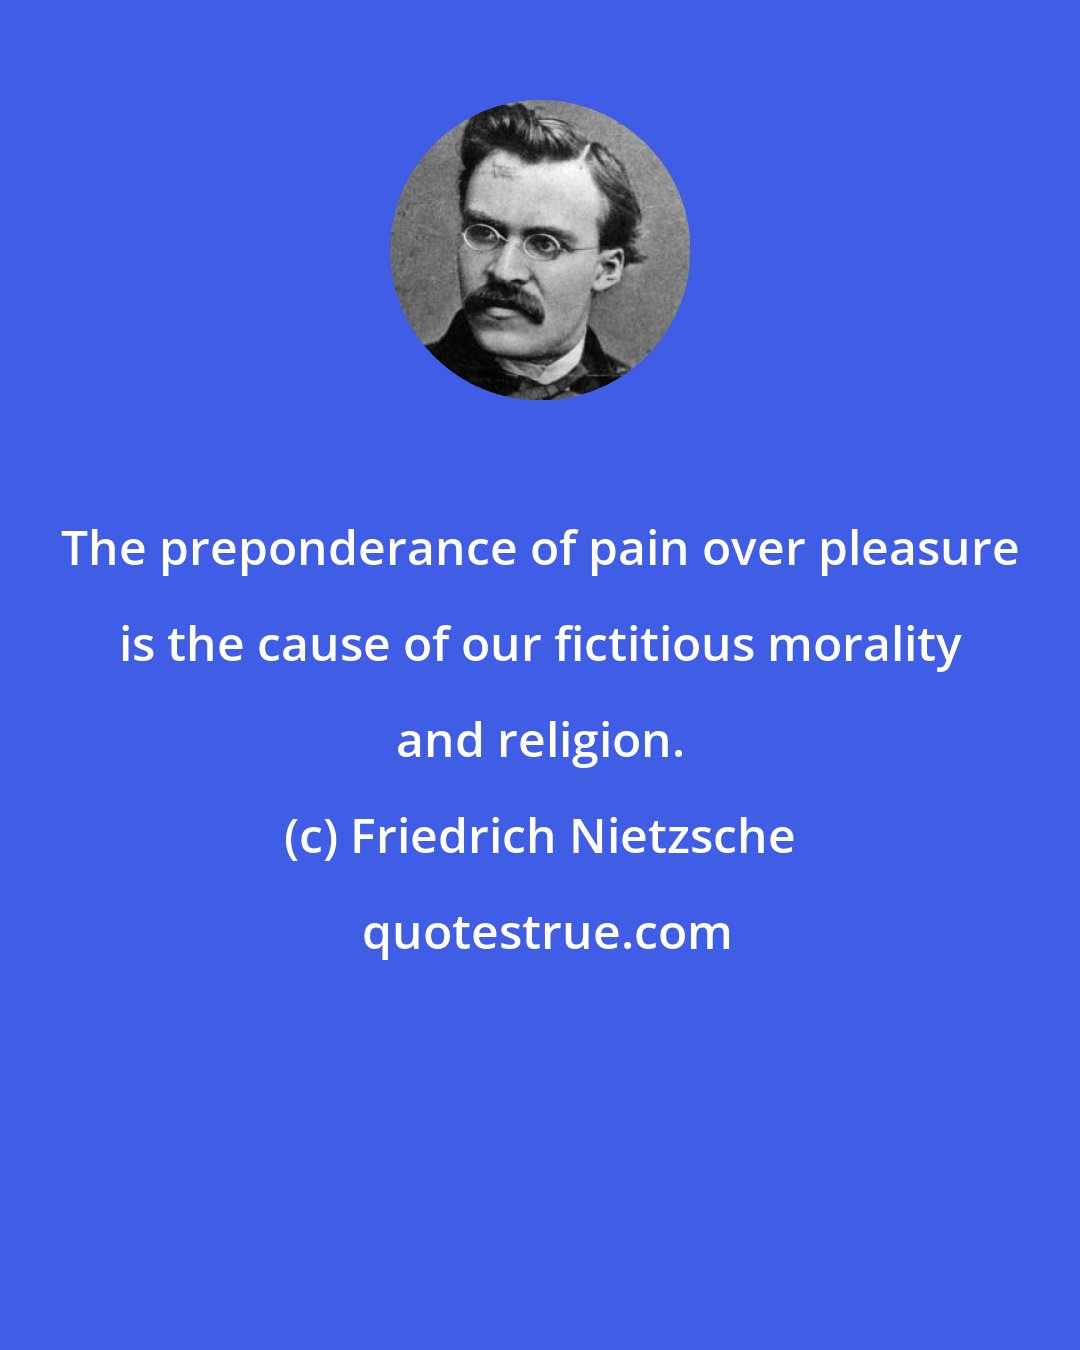 Friedrich Nietzsche: The preponderance of pain over pleasure is the cause of our fictitious morality and religion.